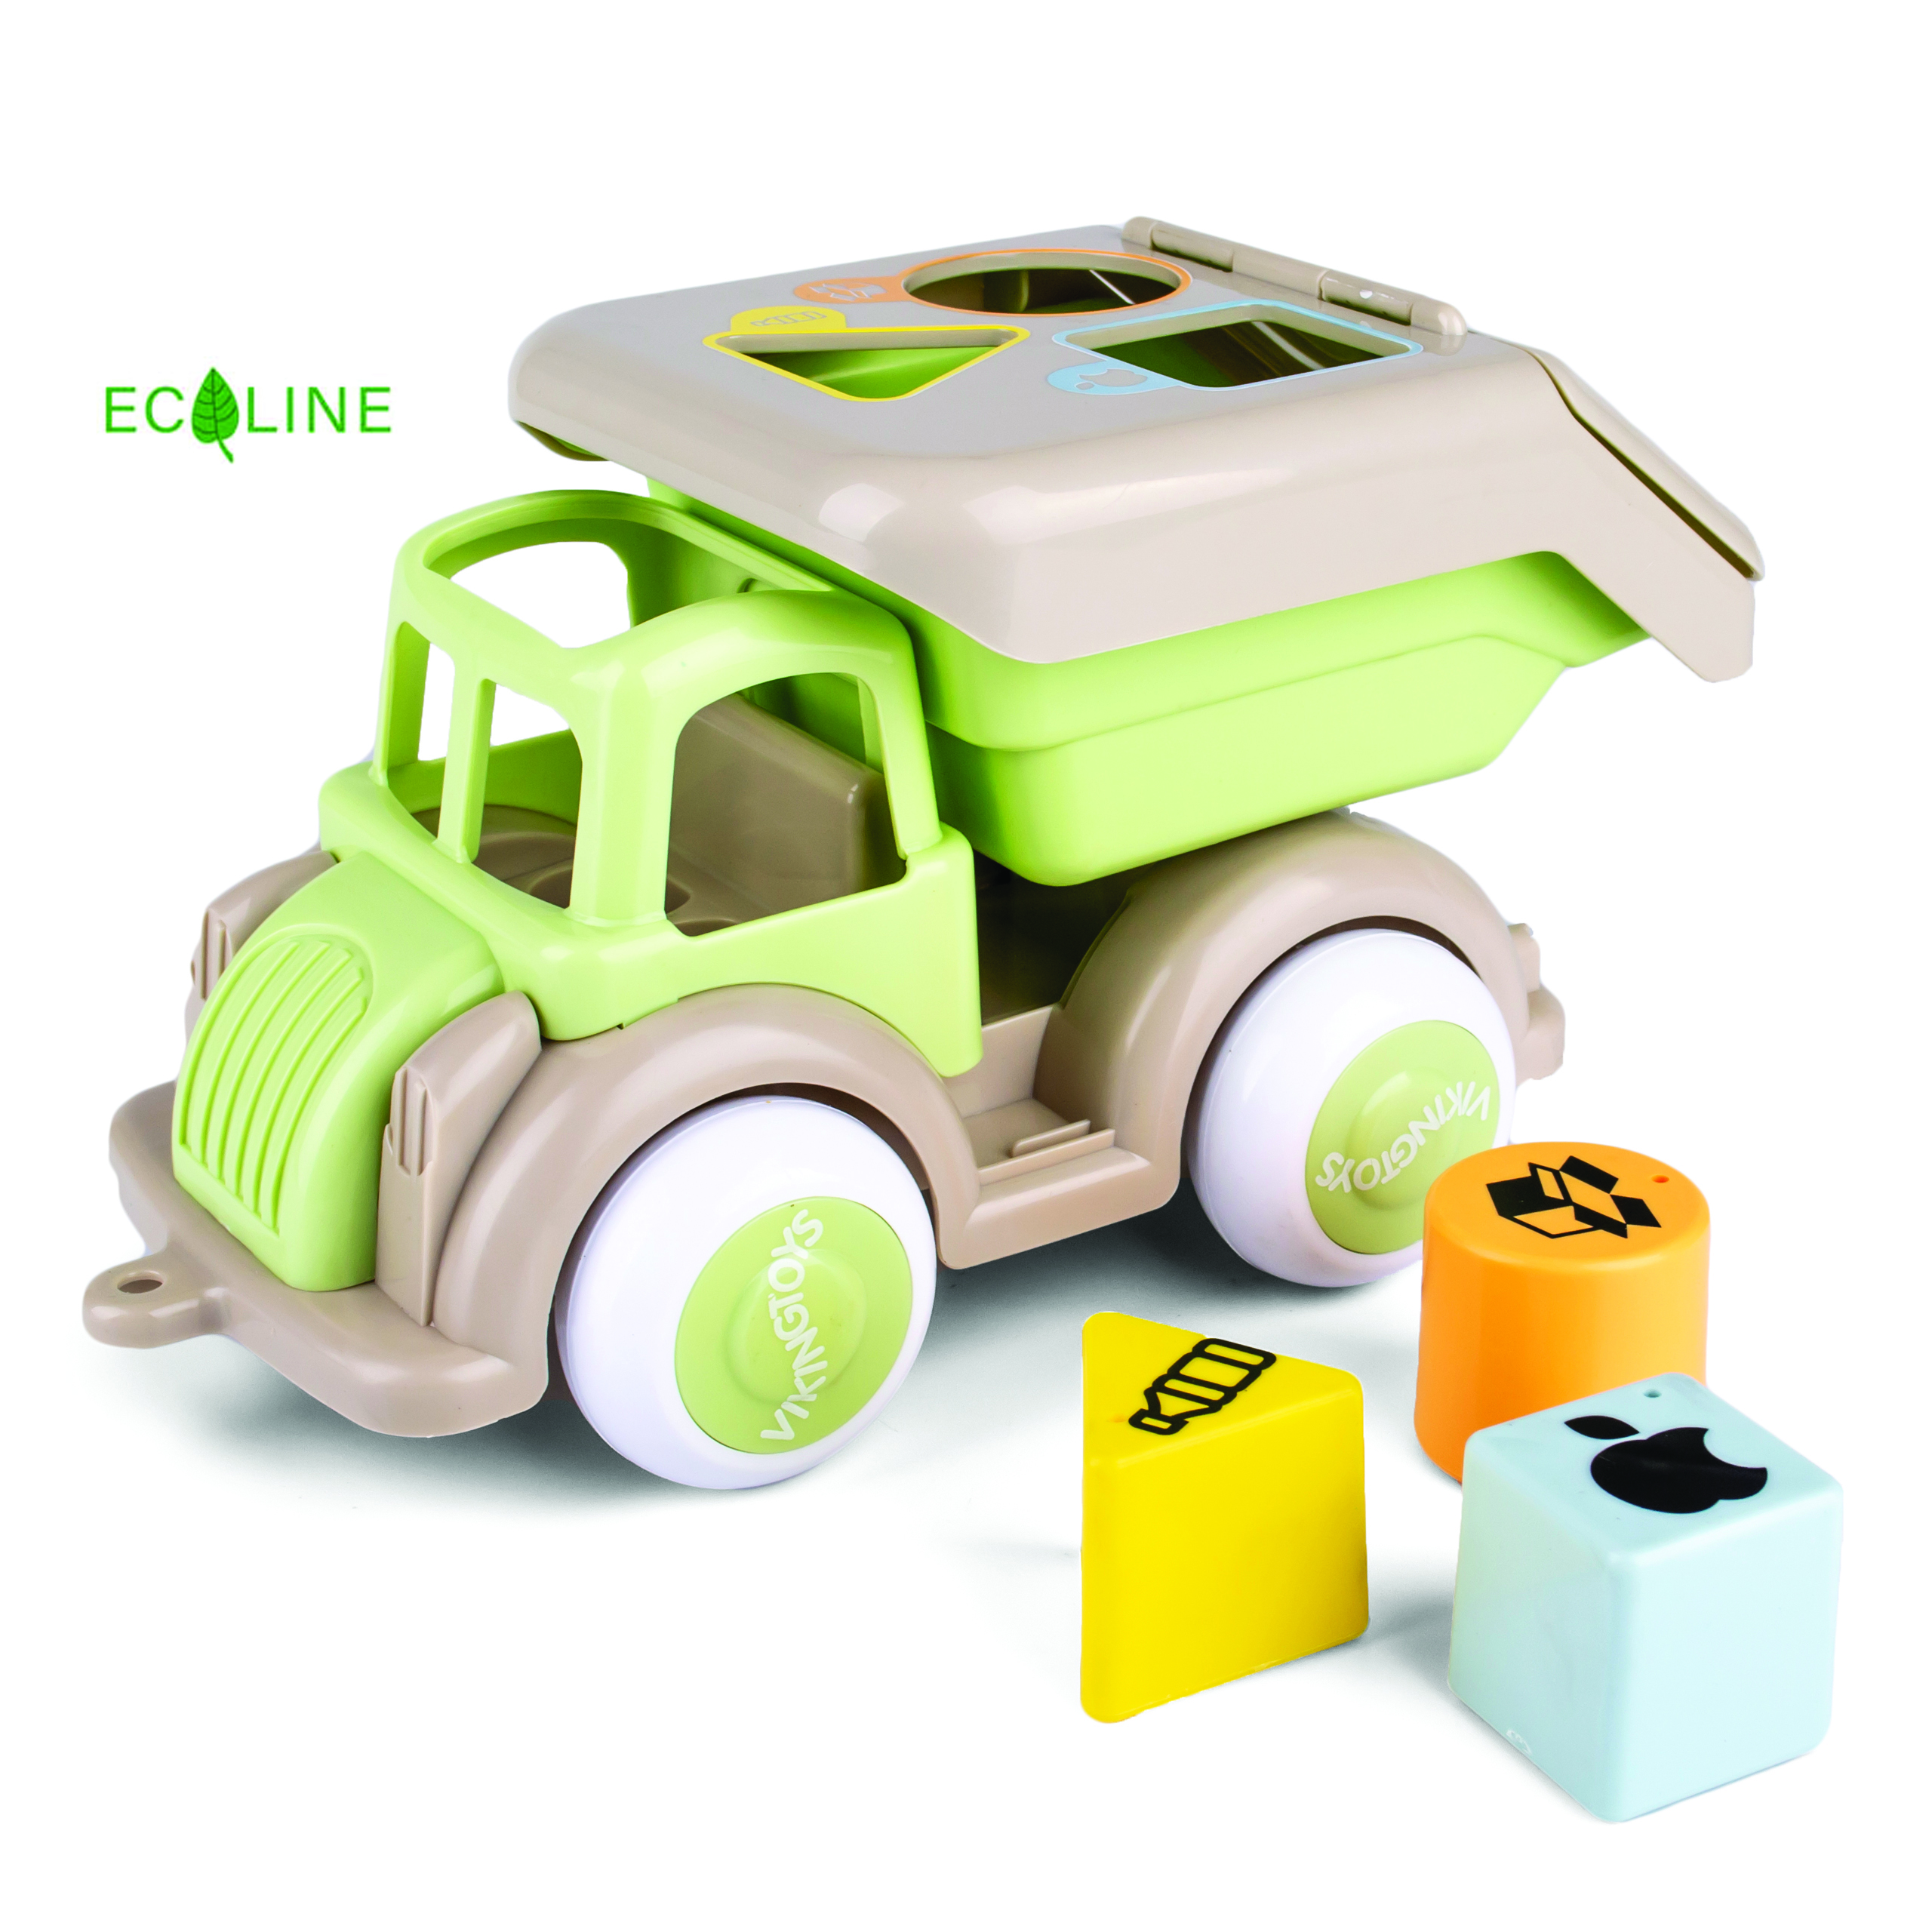 Ecoline Recycling truck